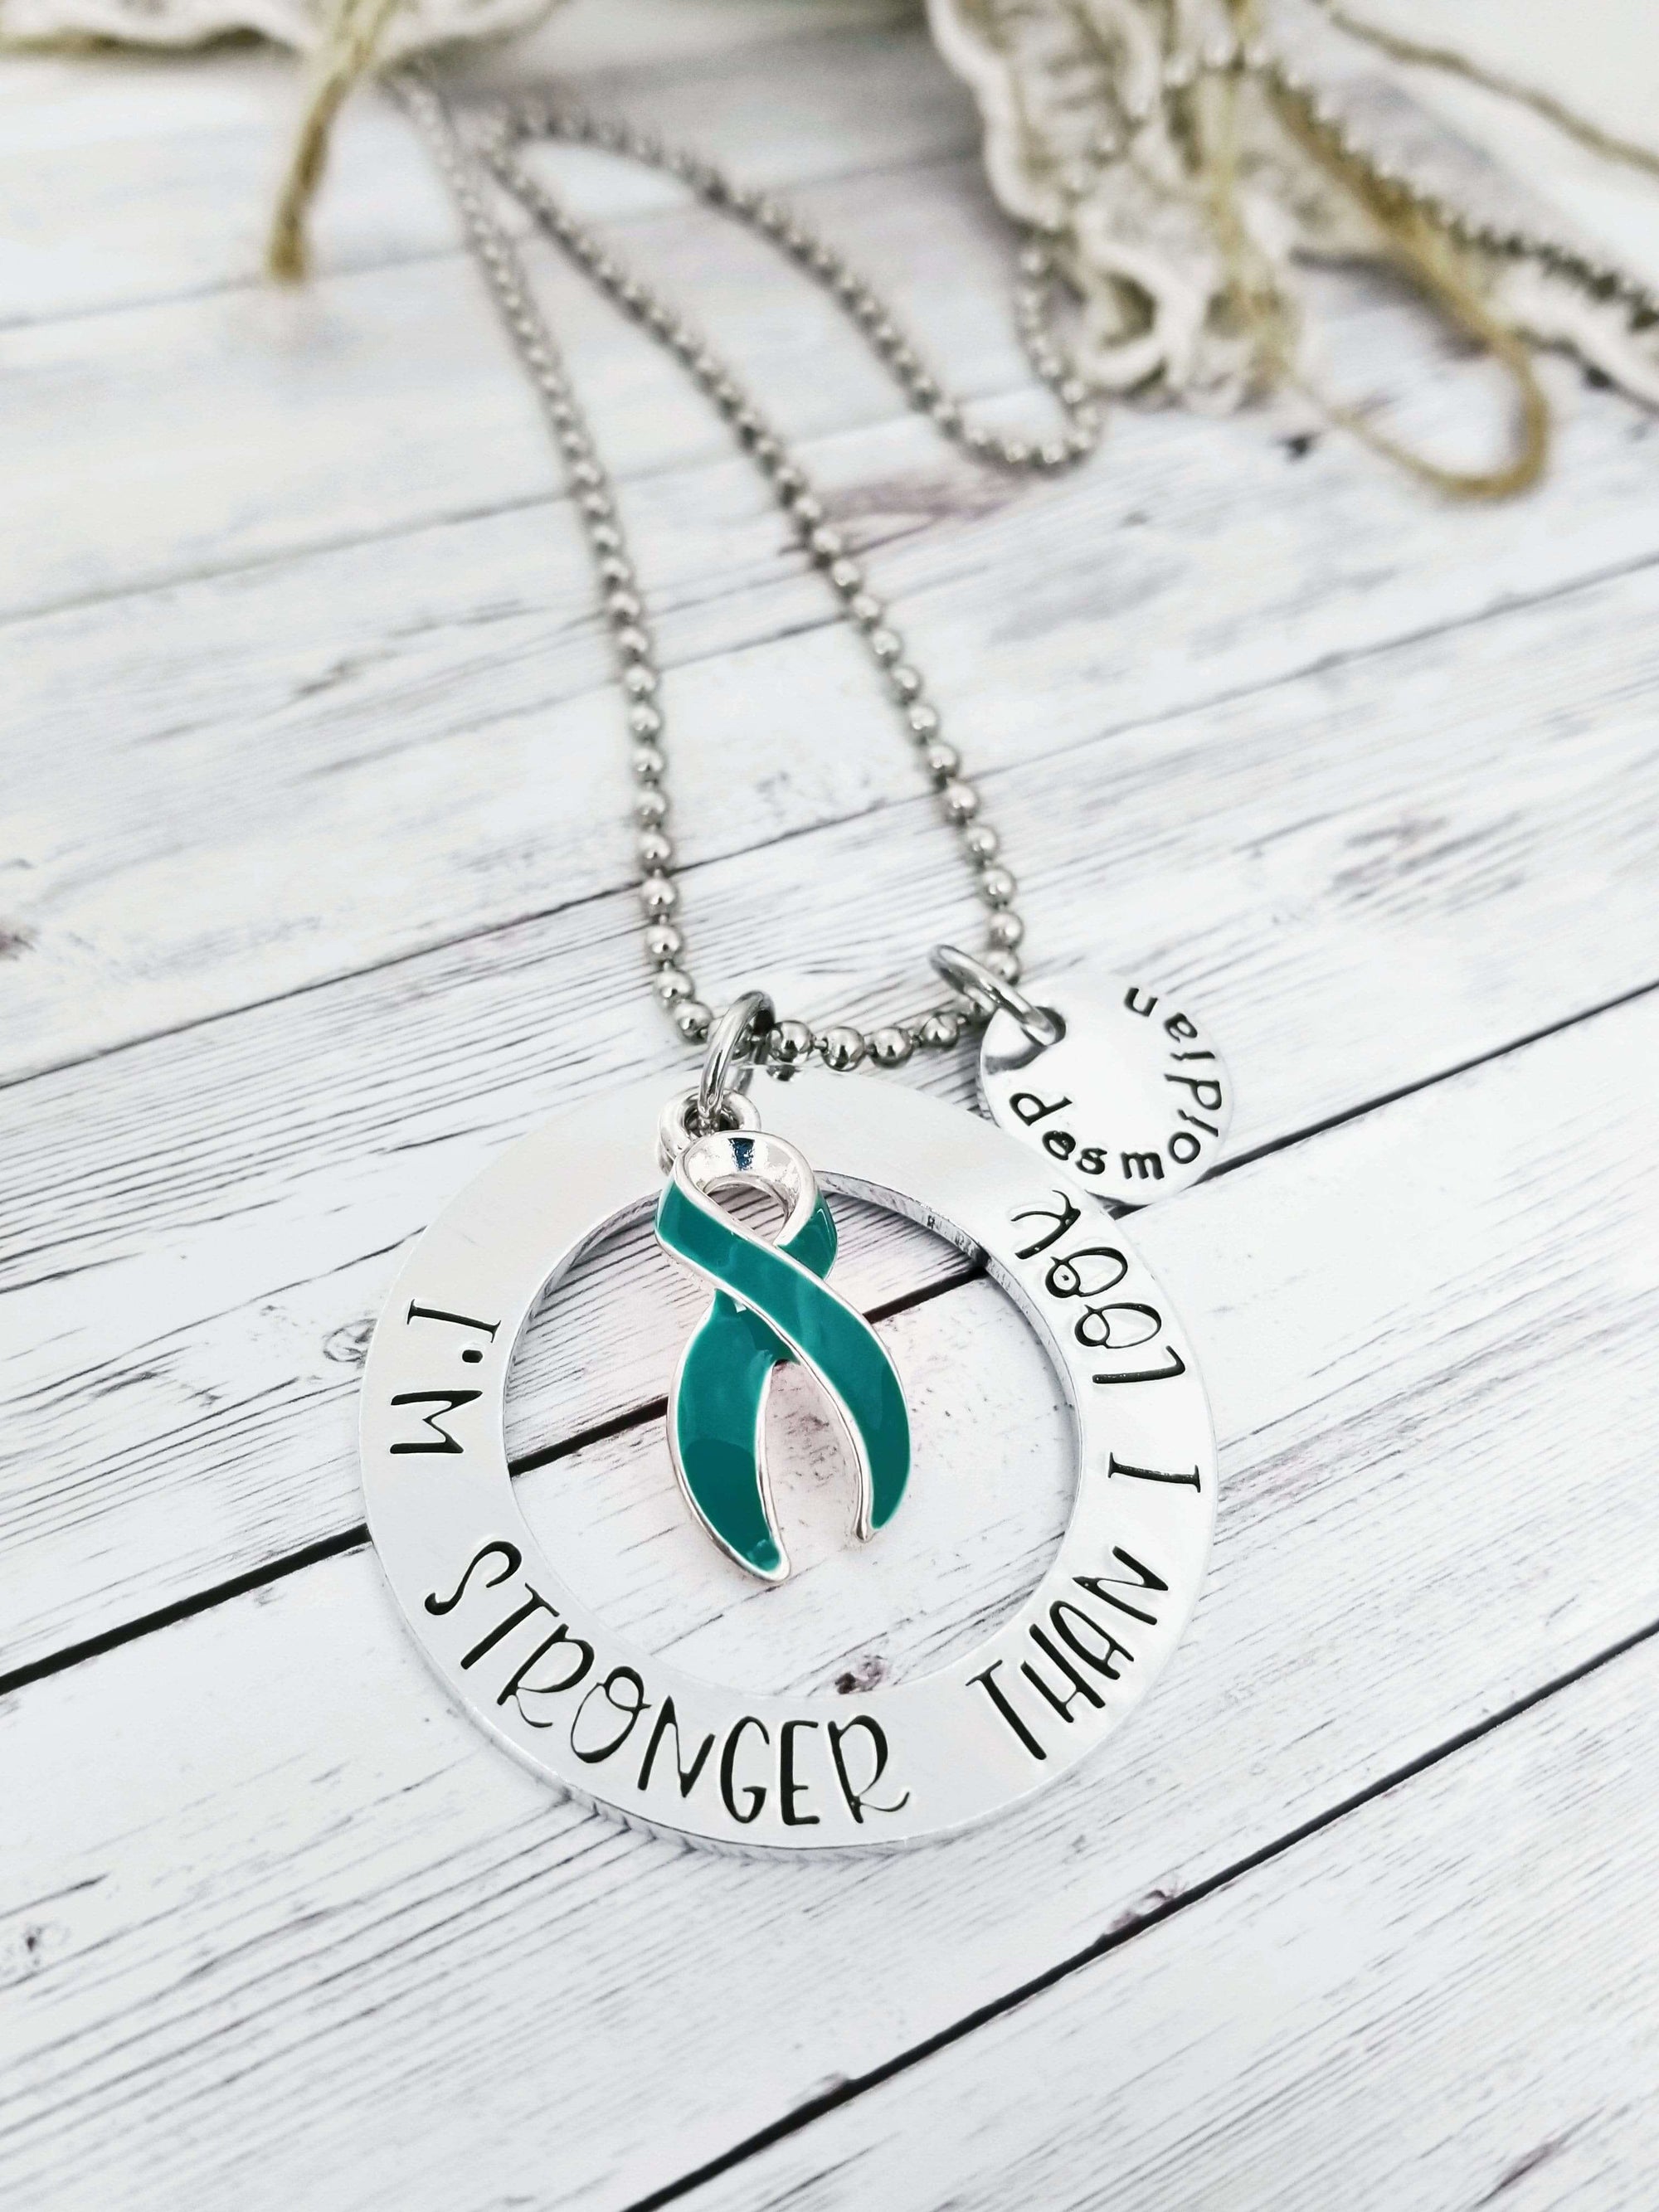 I'm Stronger Than I Look necklace - Ovarian Cancer, Scleroderma, PTSD, Ocd, Tourette's Synodrome